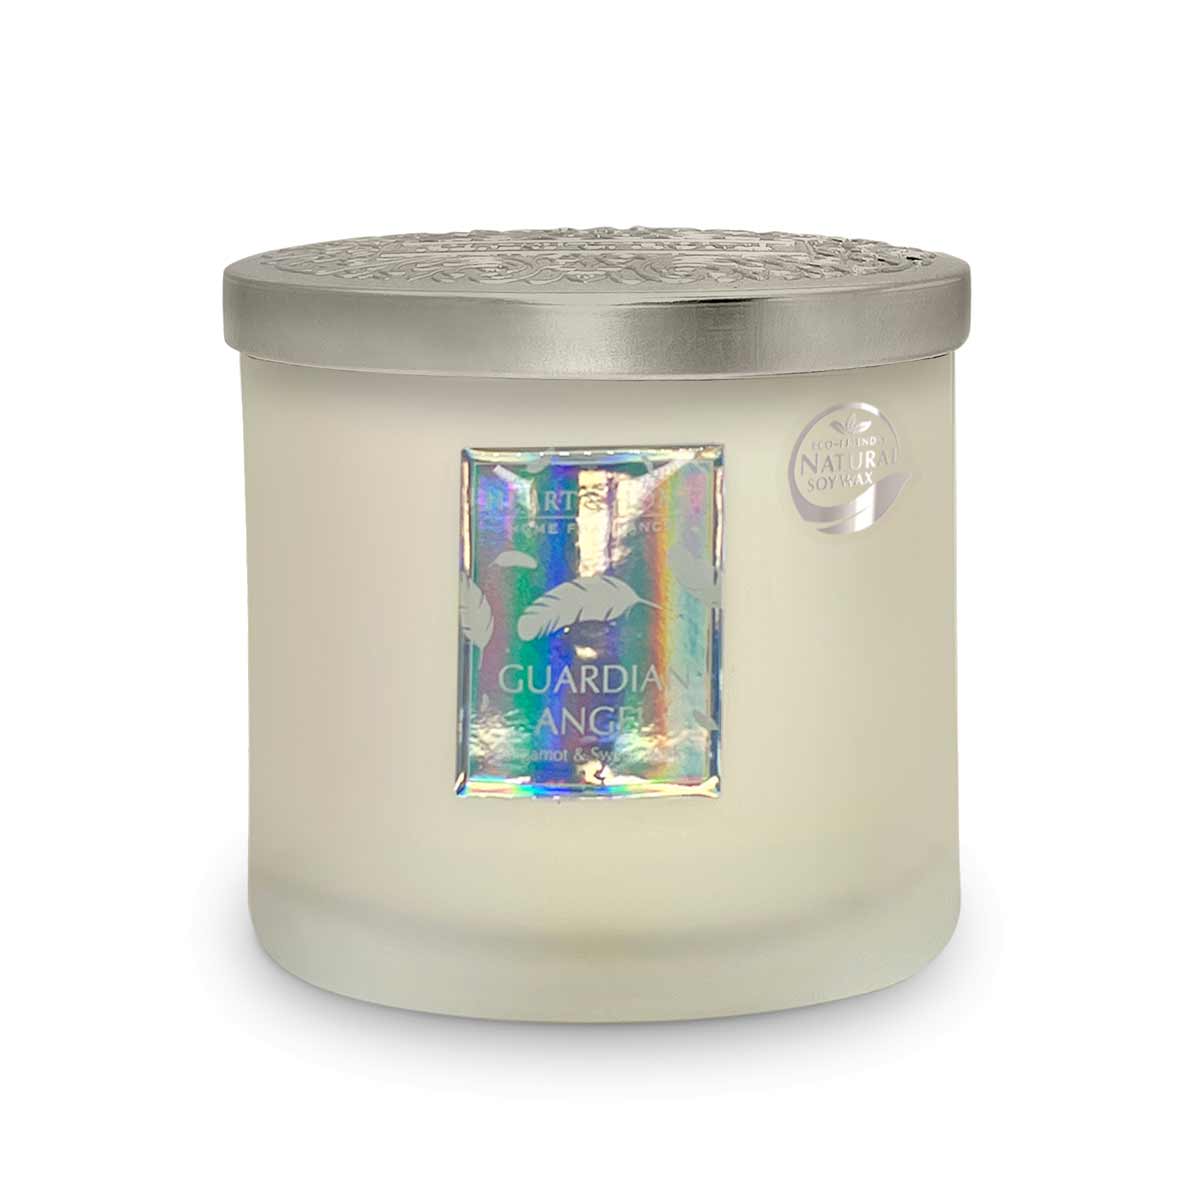 Ellipse candle 2 wicks heart and home guardian angel